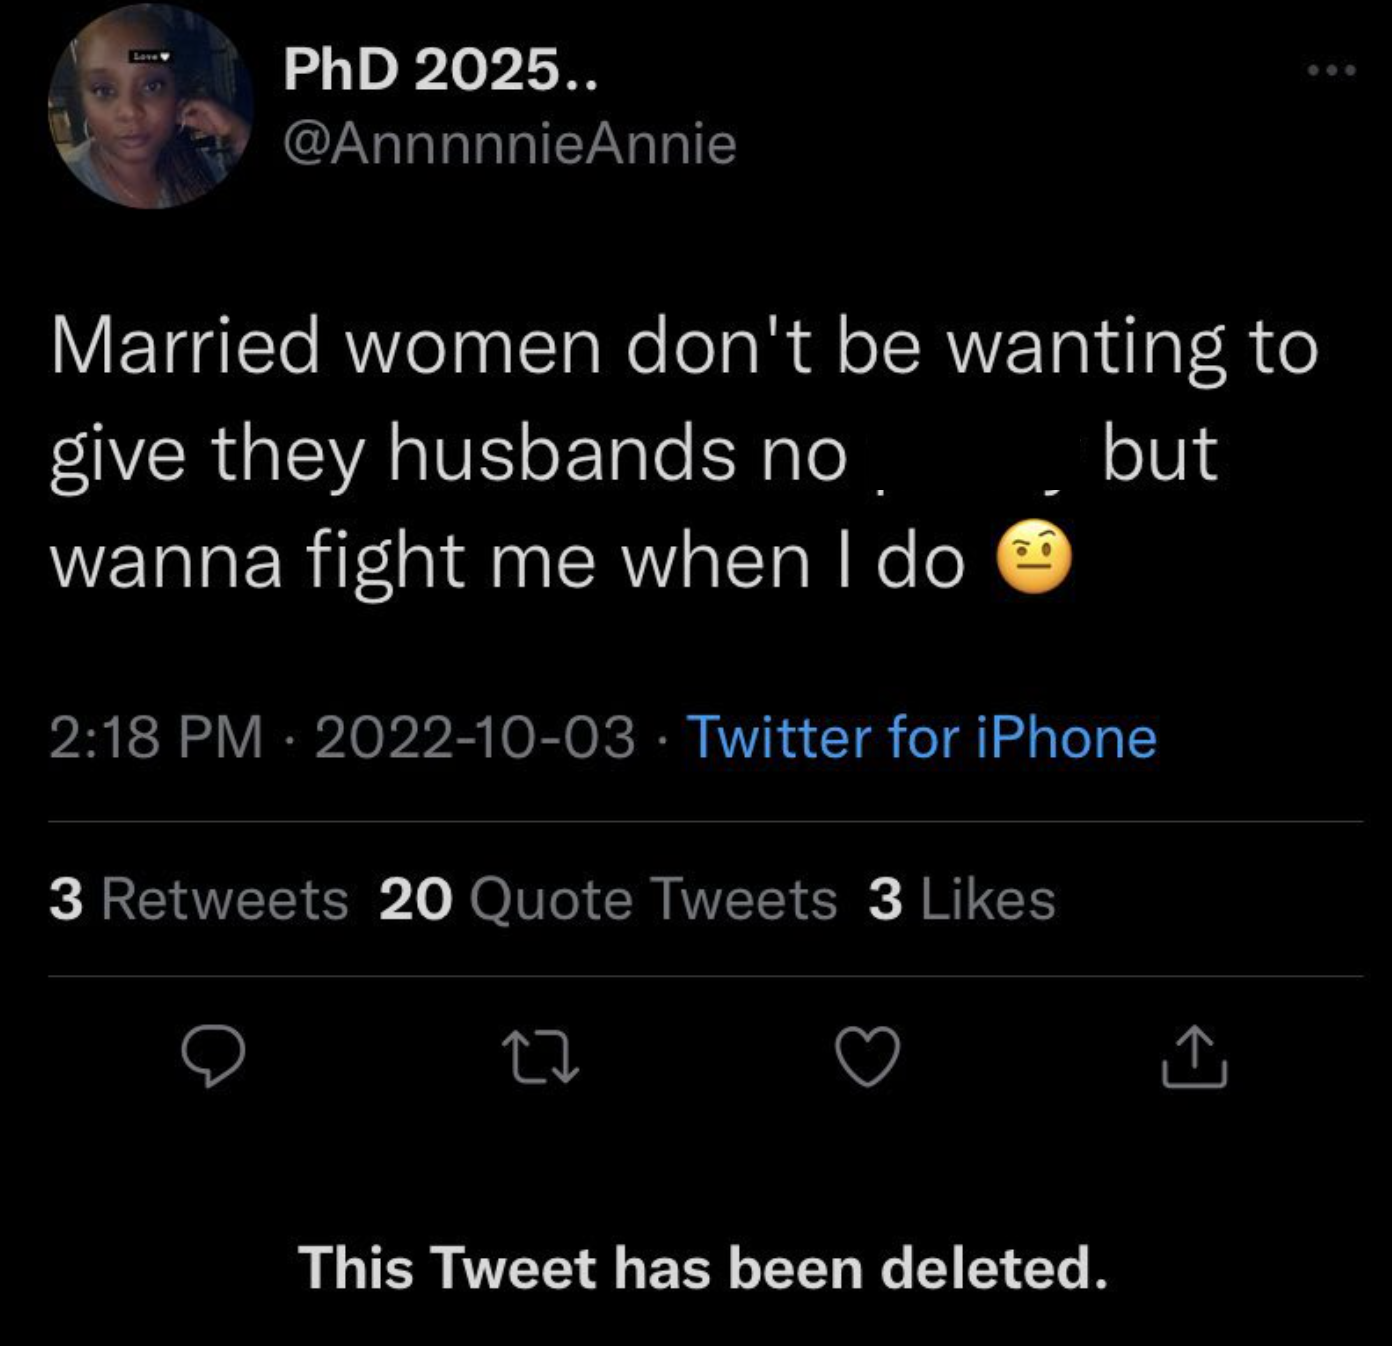 screenshot - PhD 2025.. Married women don't be wanting to give they husbands no wanna fight me when I do but Twitter for iPhone 3 20 Quote Tweets 3 27 This Tweet has been deleted.